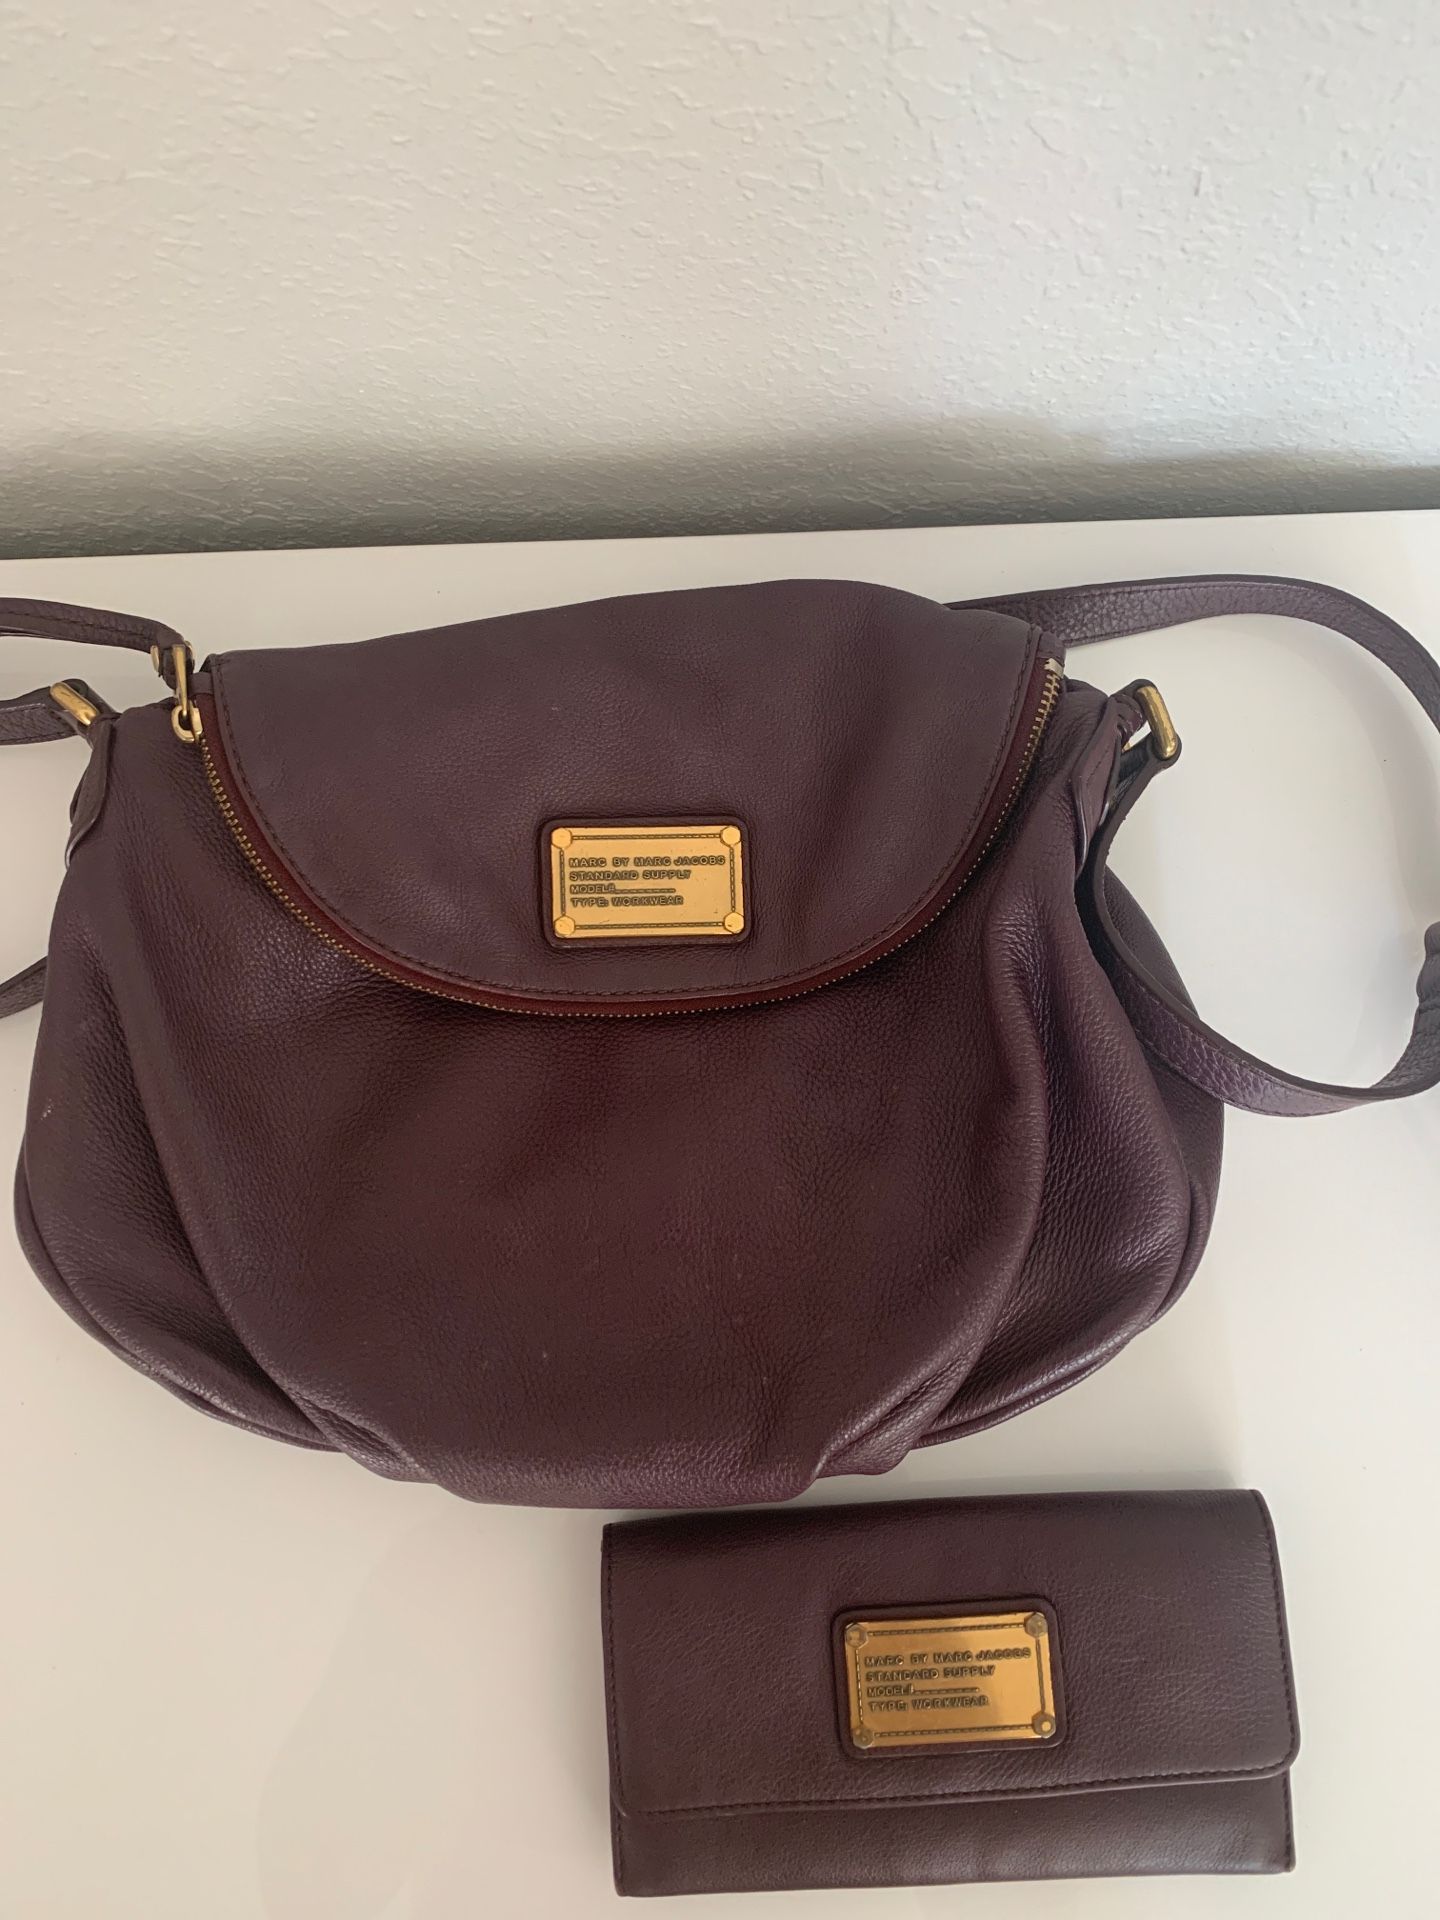 Marc Jacobs burgundy bag with matching wallet!